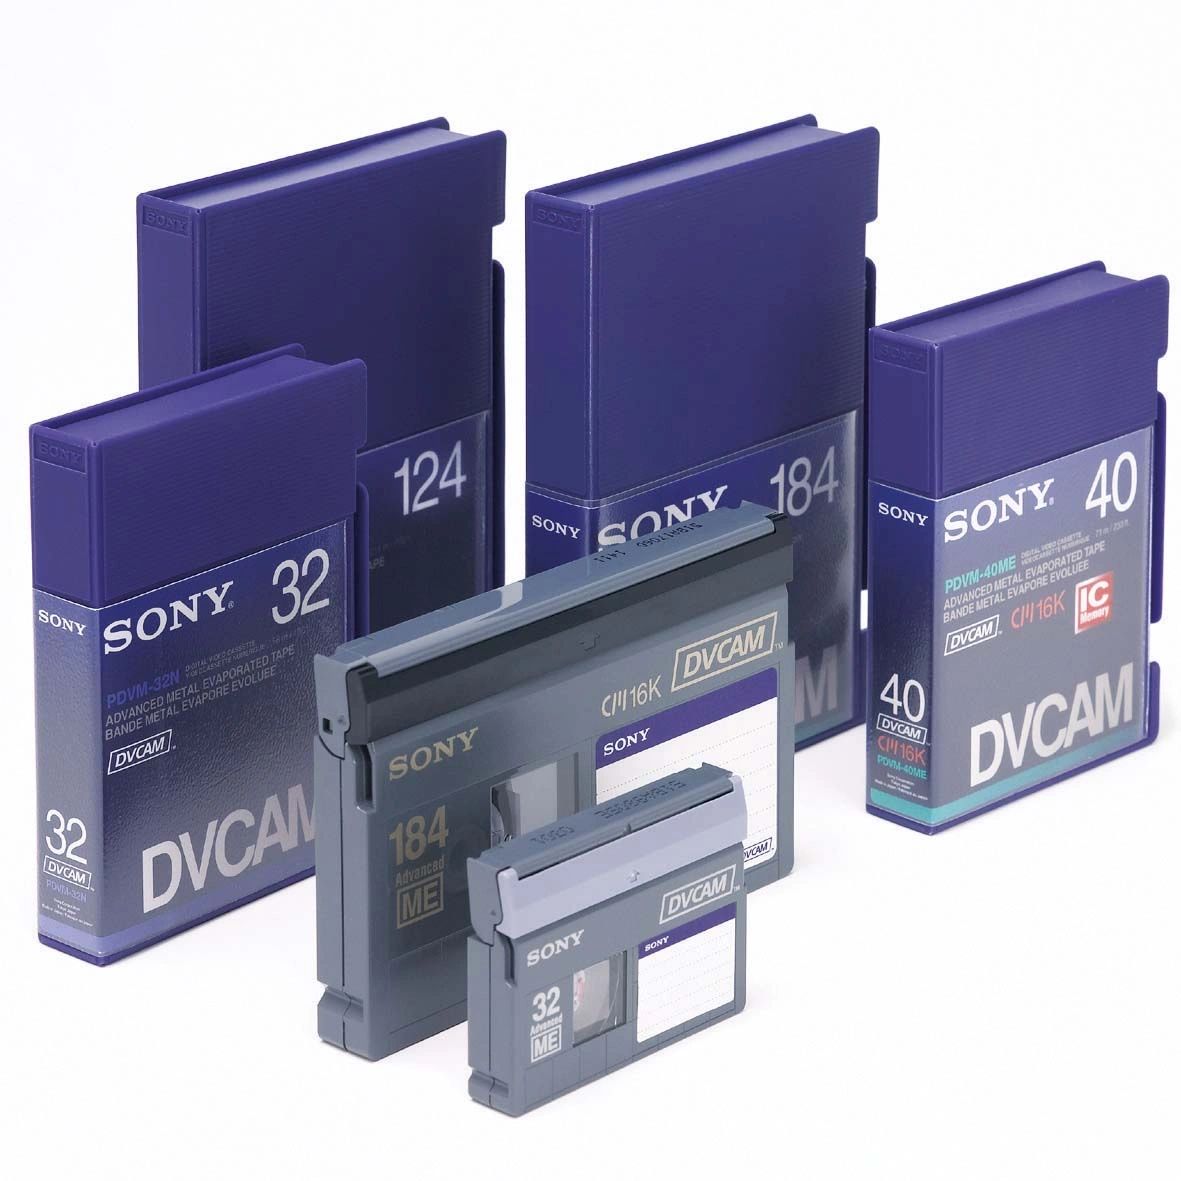 Transfer dvcam tapes to dvd or a video file